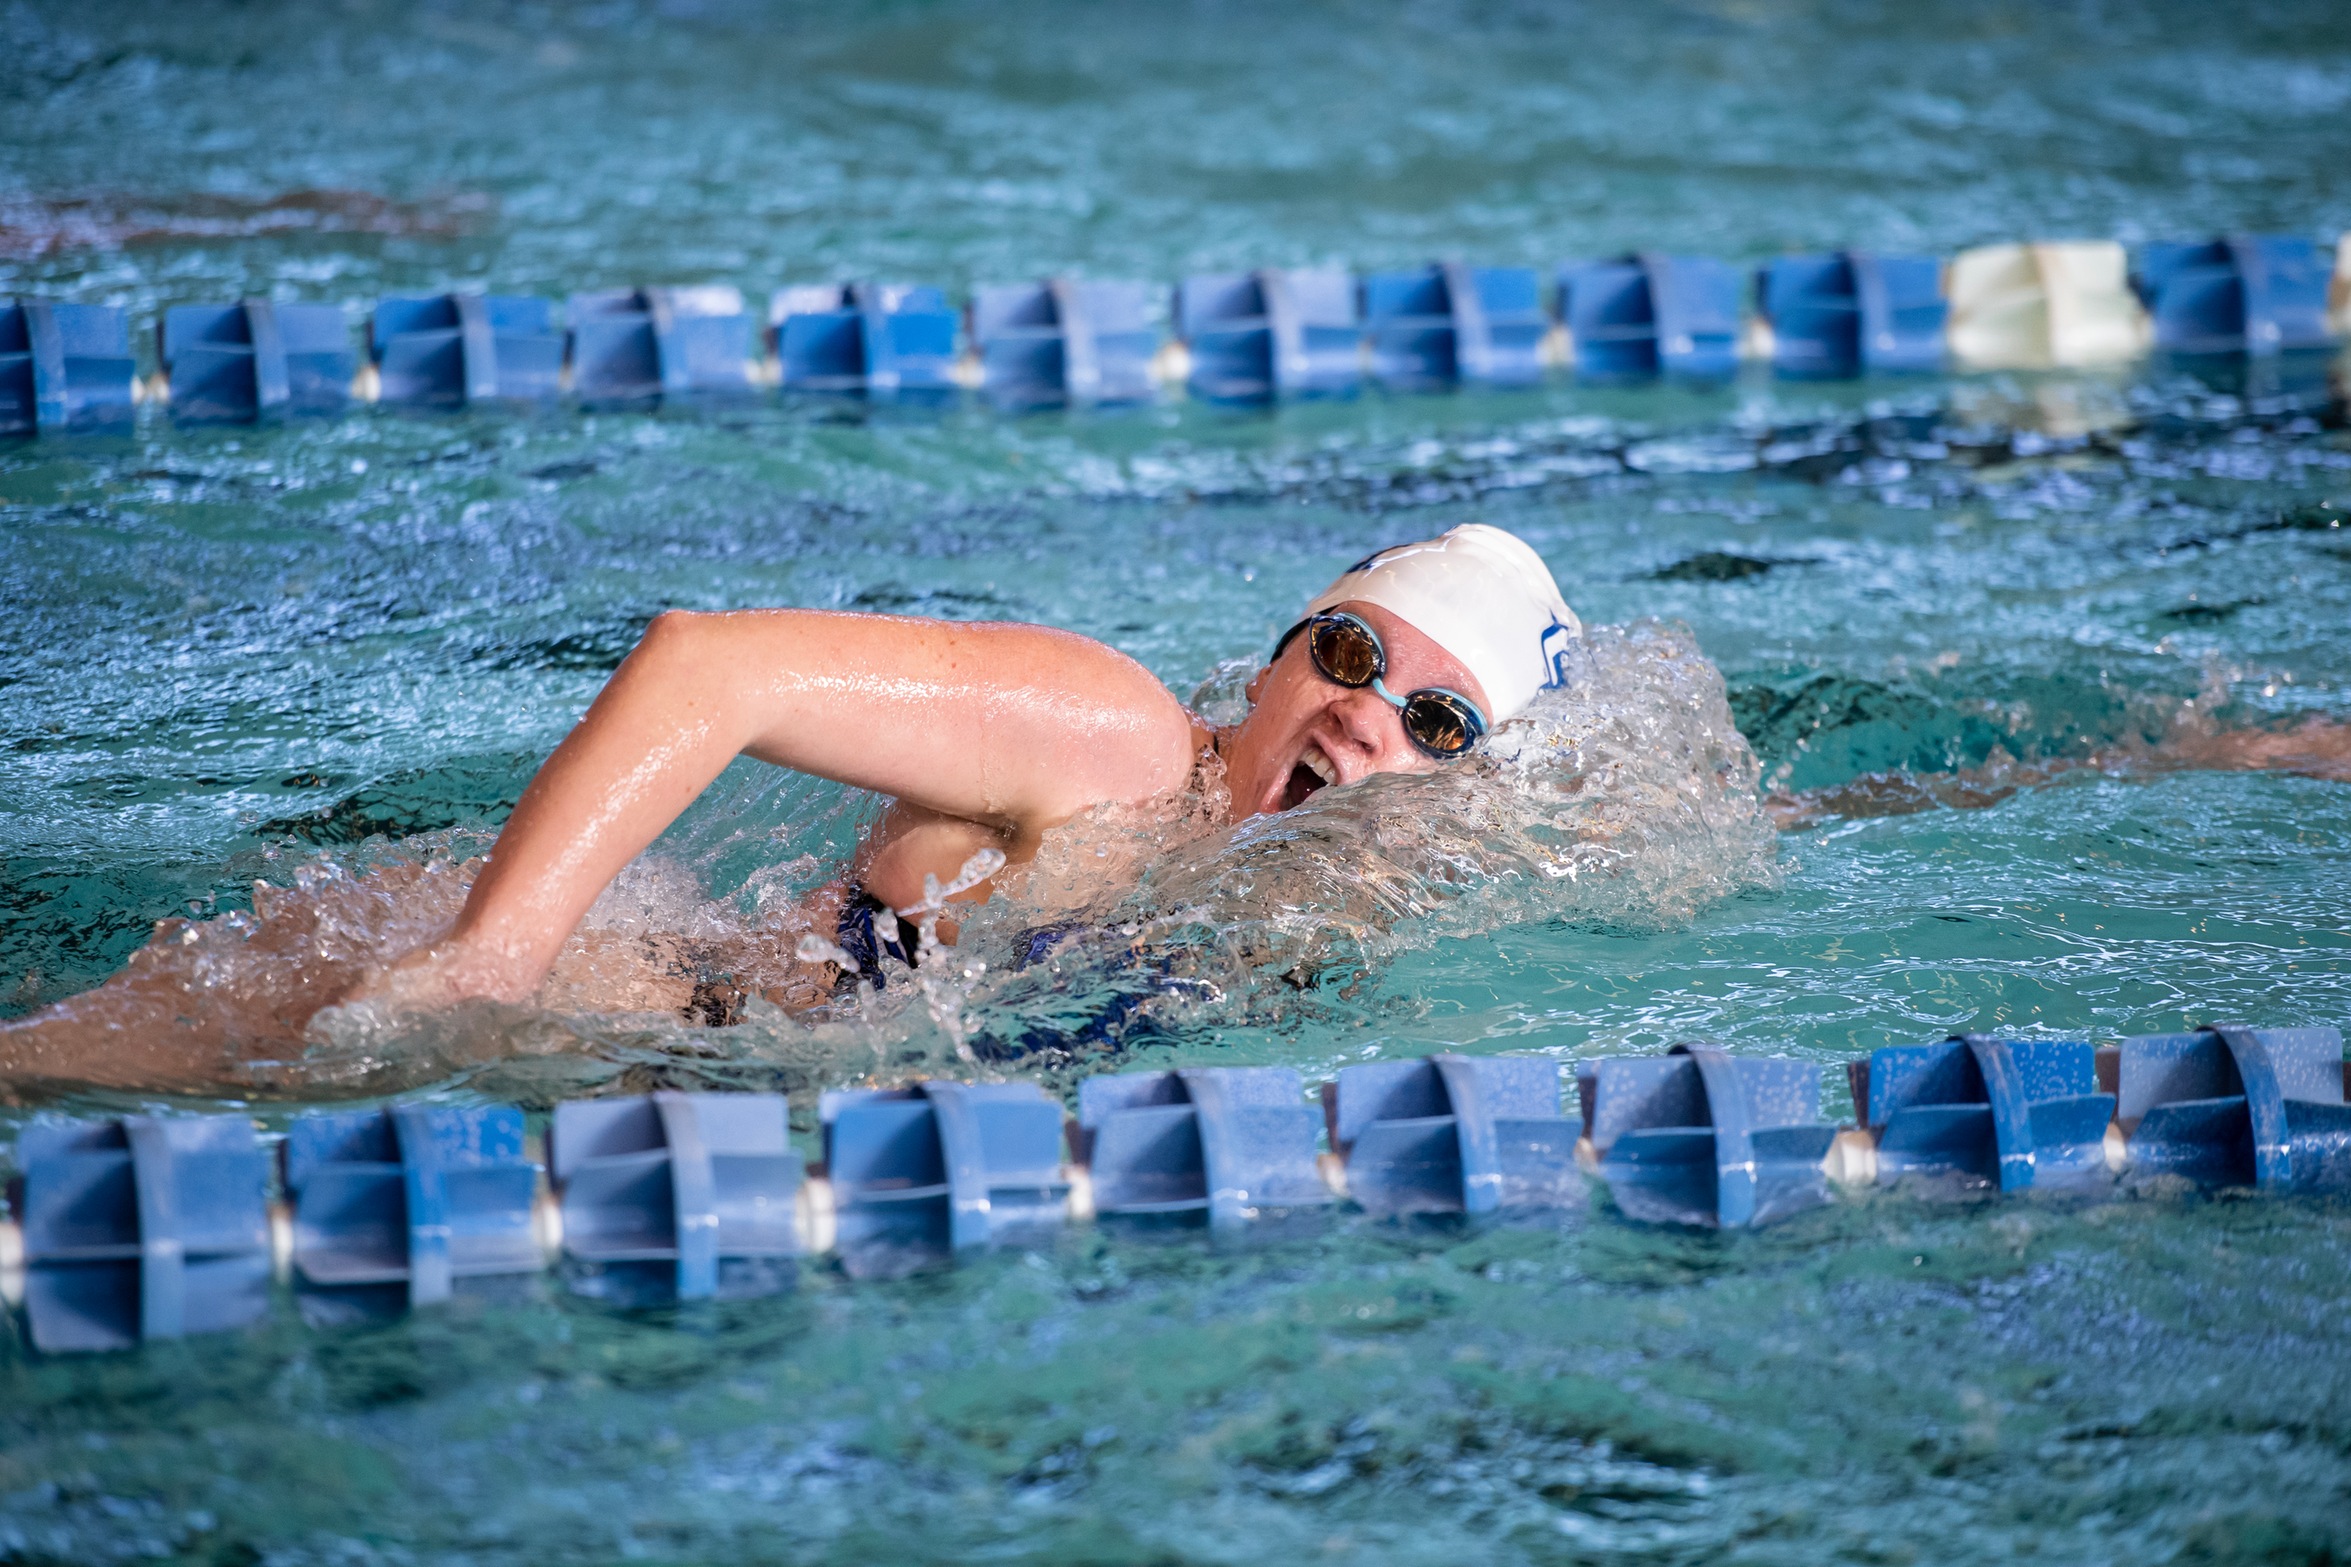 Abbey Keane won the 1,000 freestyle on the first night of the Blue Devils dual meet with New Hampshire. (Photo: Steve McLaughlin)